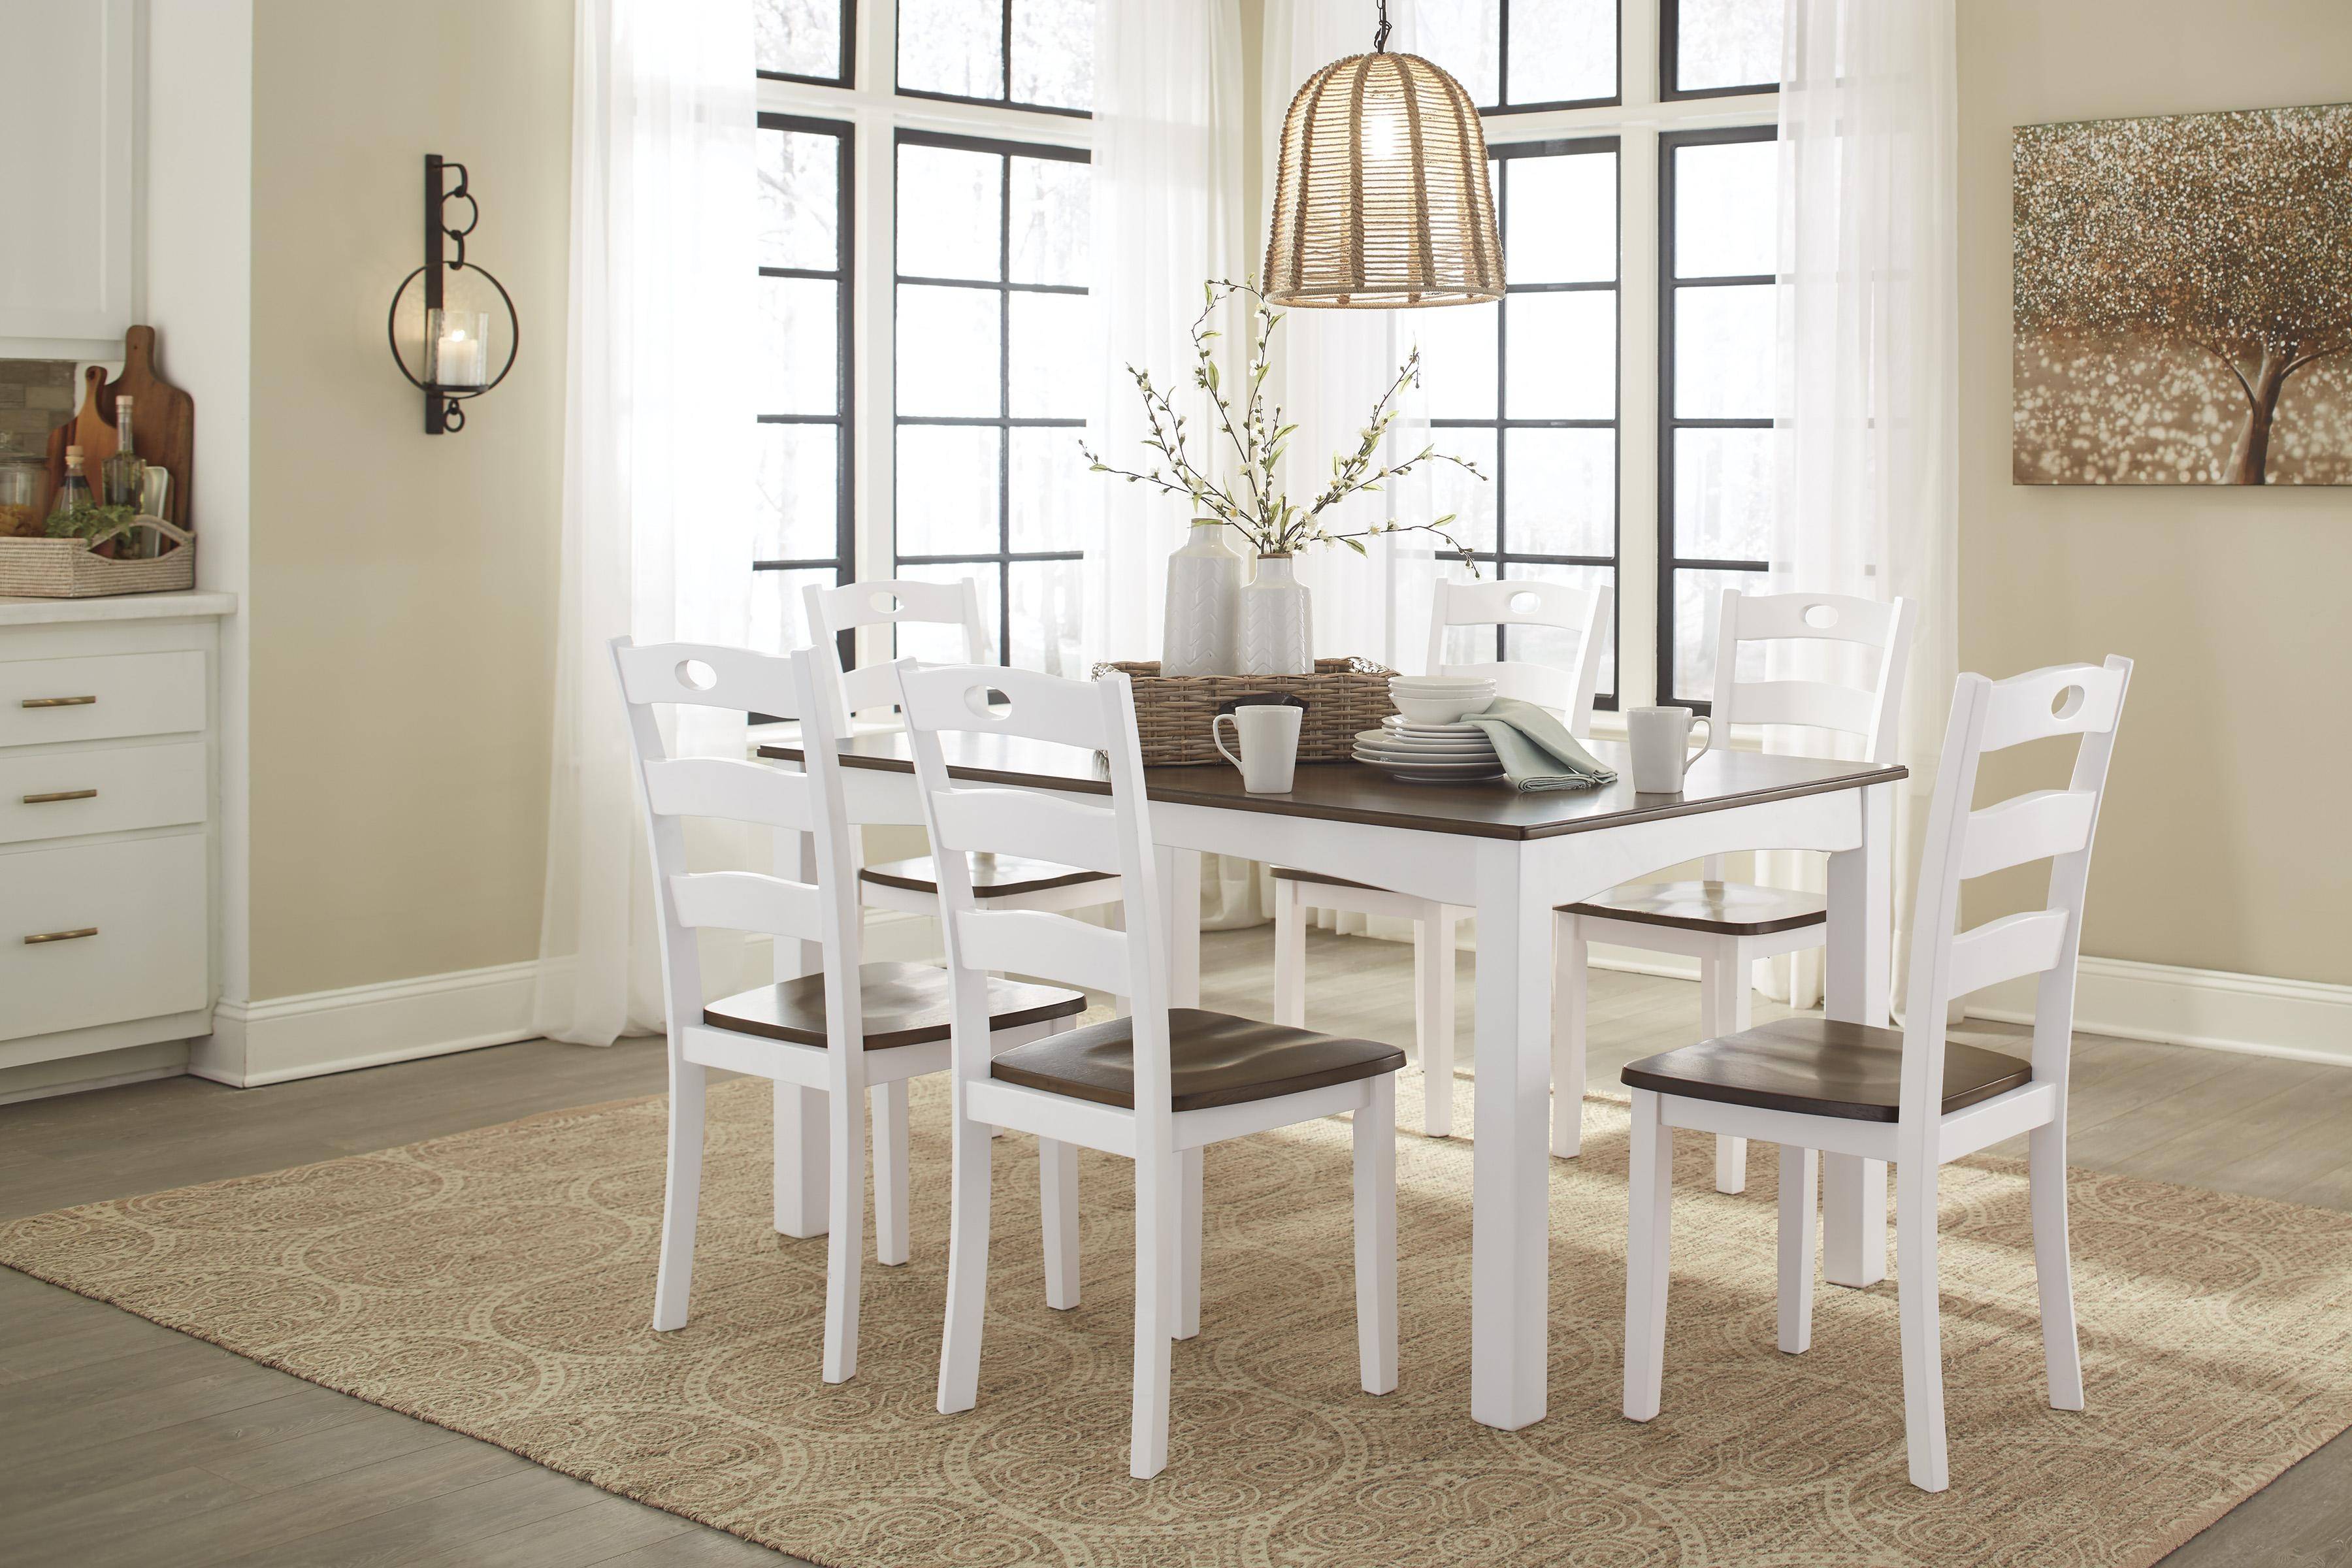 Buy Ashley Woodanville Dining Room Set 7 Pcs in Brown, White, Wood